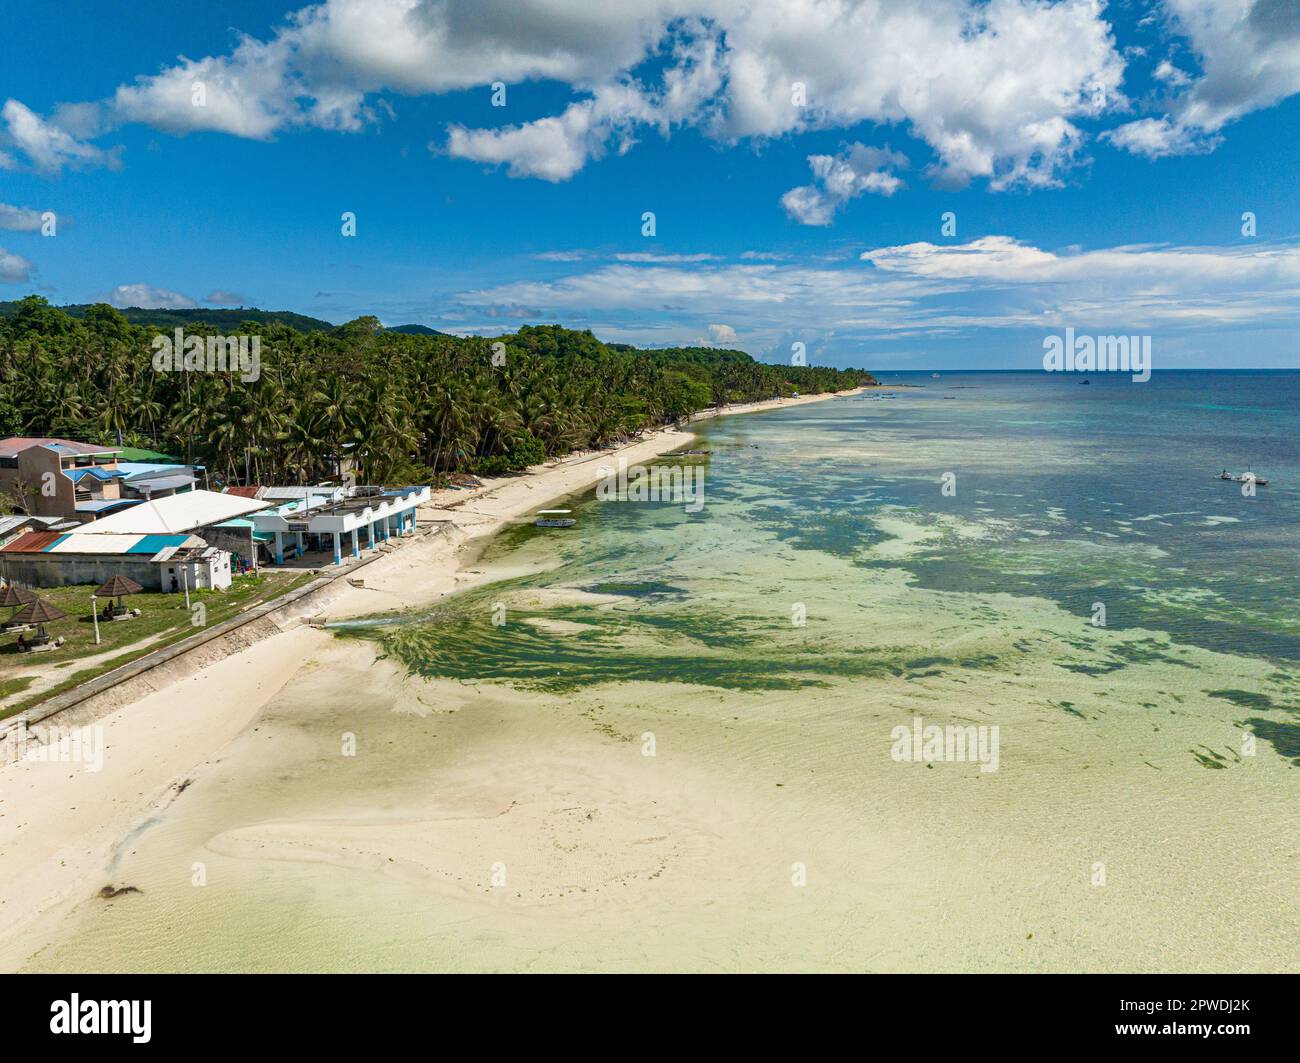 White shiny seashore with turquoise lagoon of coral reefs along with the healthy coconut trees. Siquijor, Philippines. Stock Photo